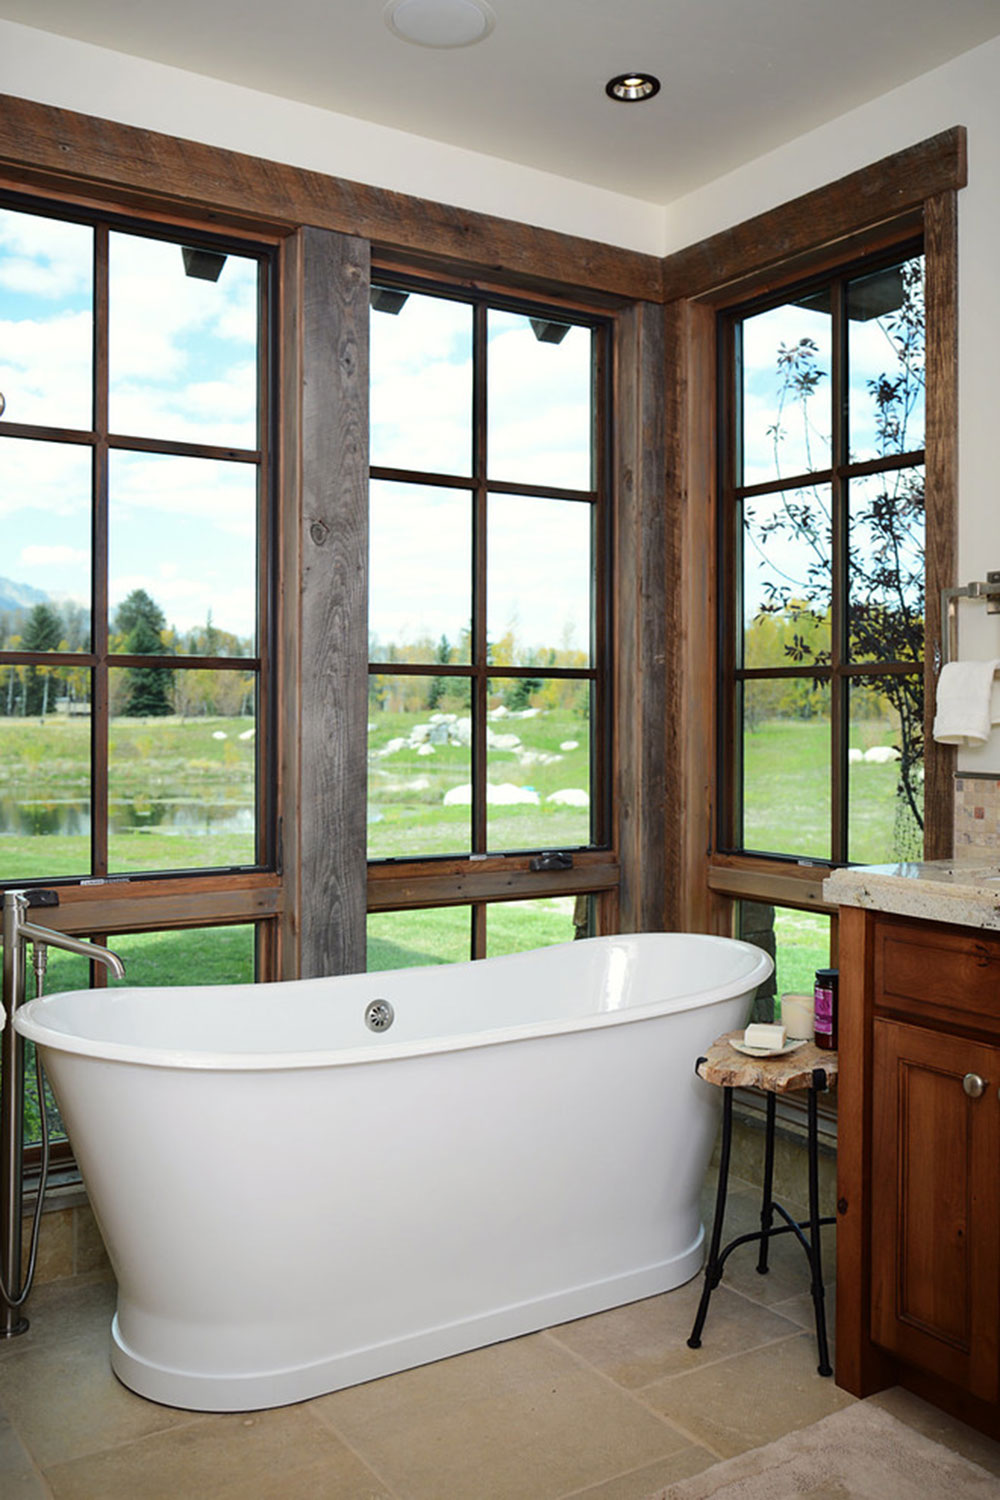 Meadow-Ranch-by-Brian-Goff-Interior-Design Bathroom windows ideas that you can try for your home